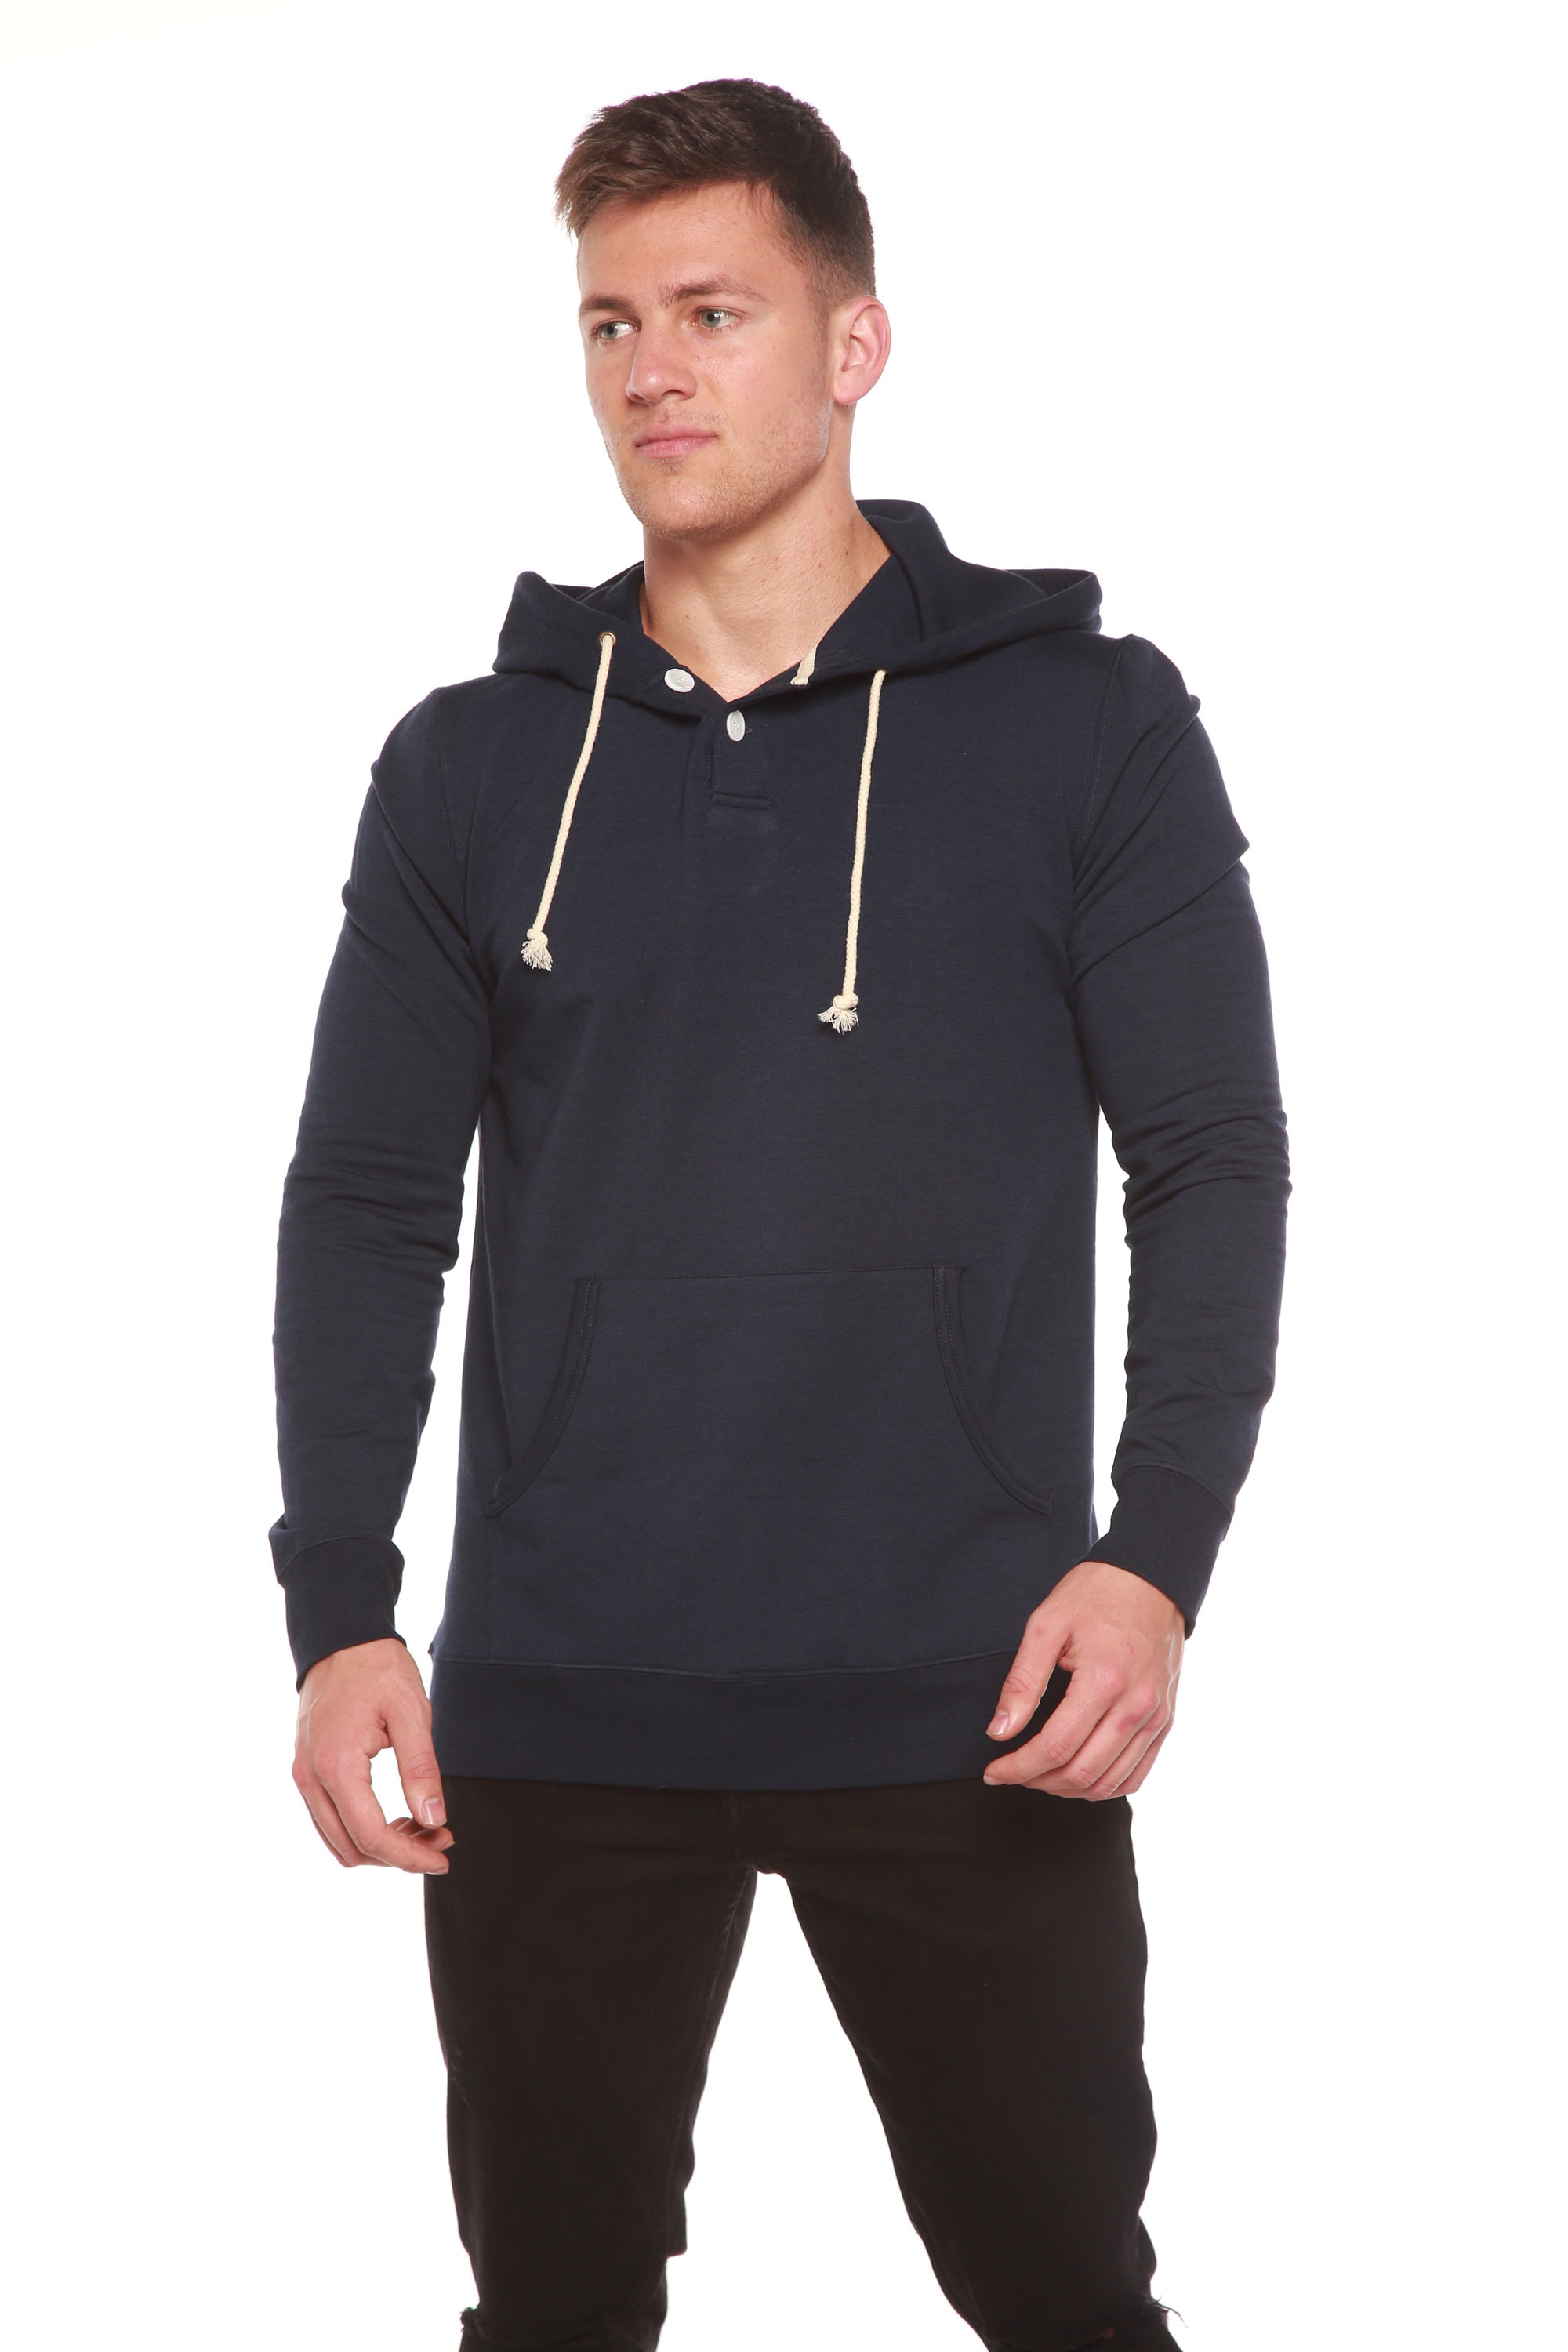 Men's Henley Style Bamboo Fleece Hoodie Breathable and Silky Soft ...